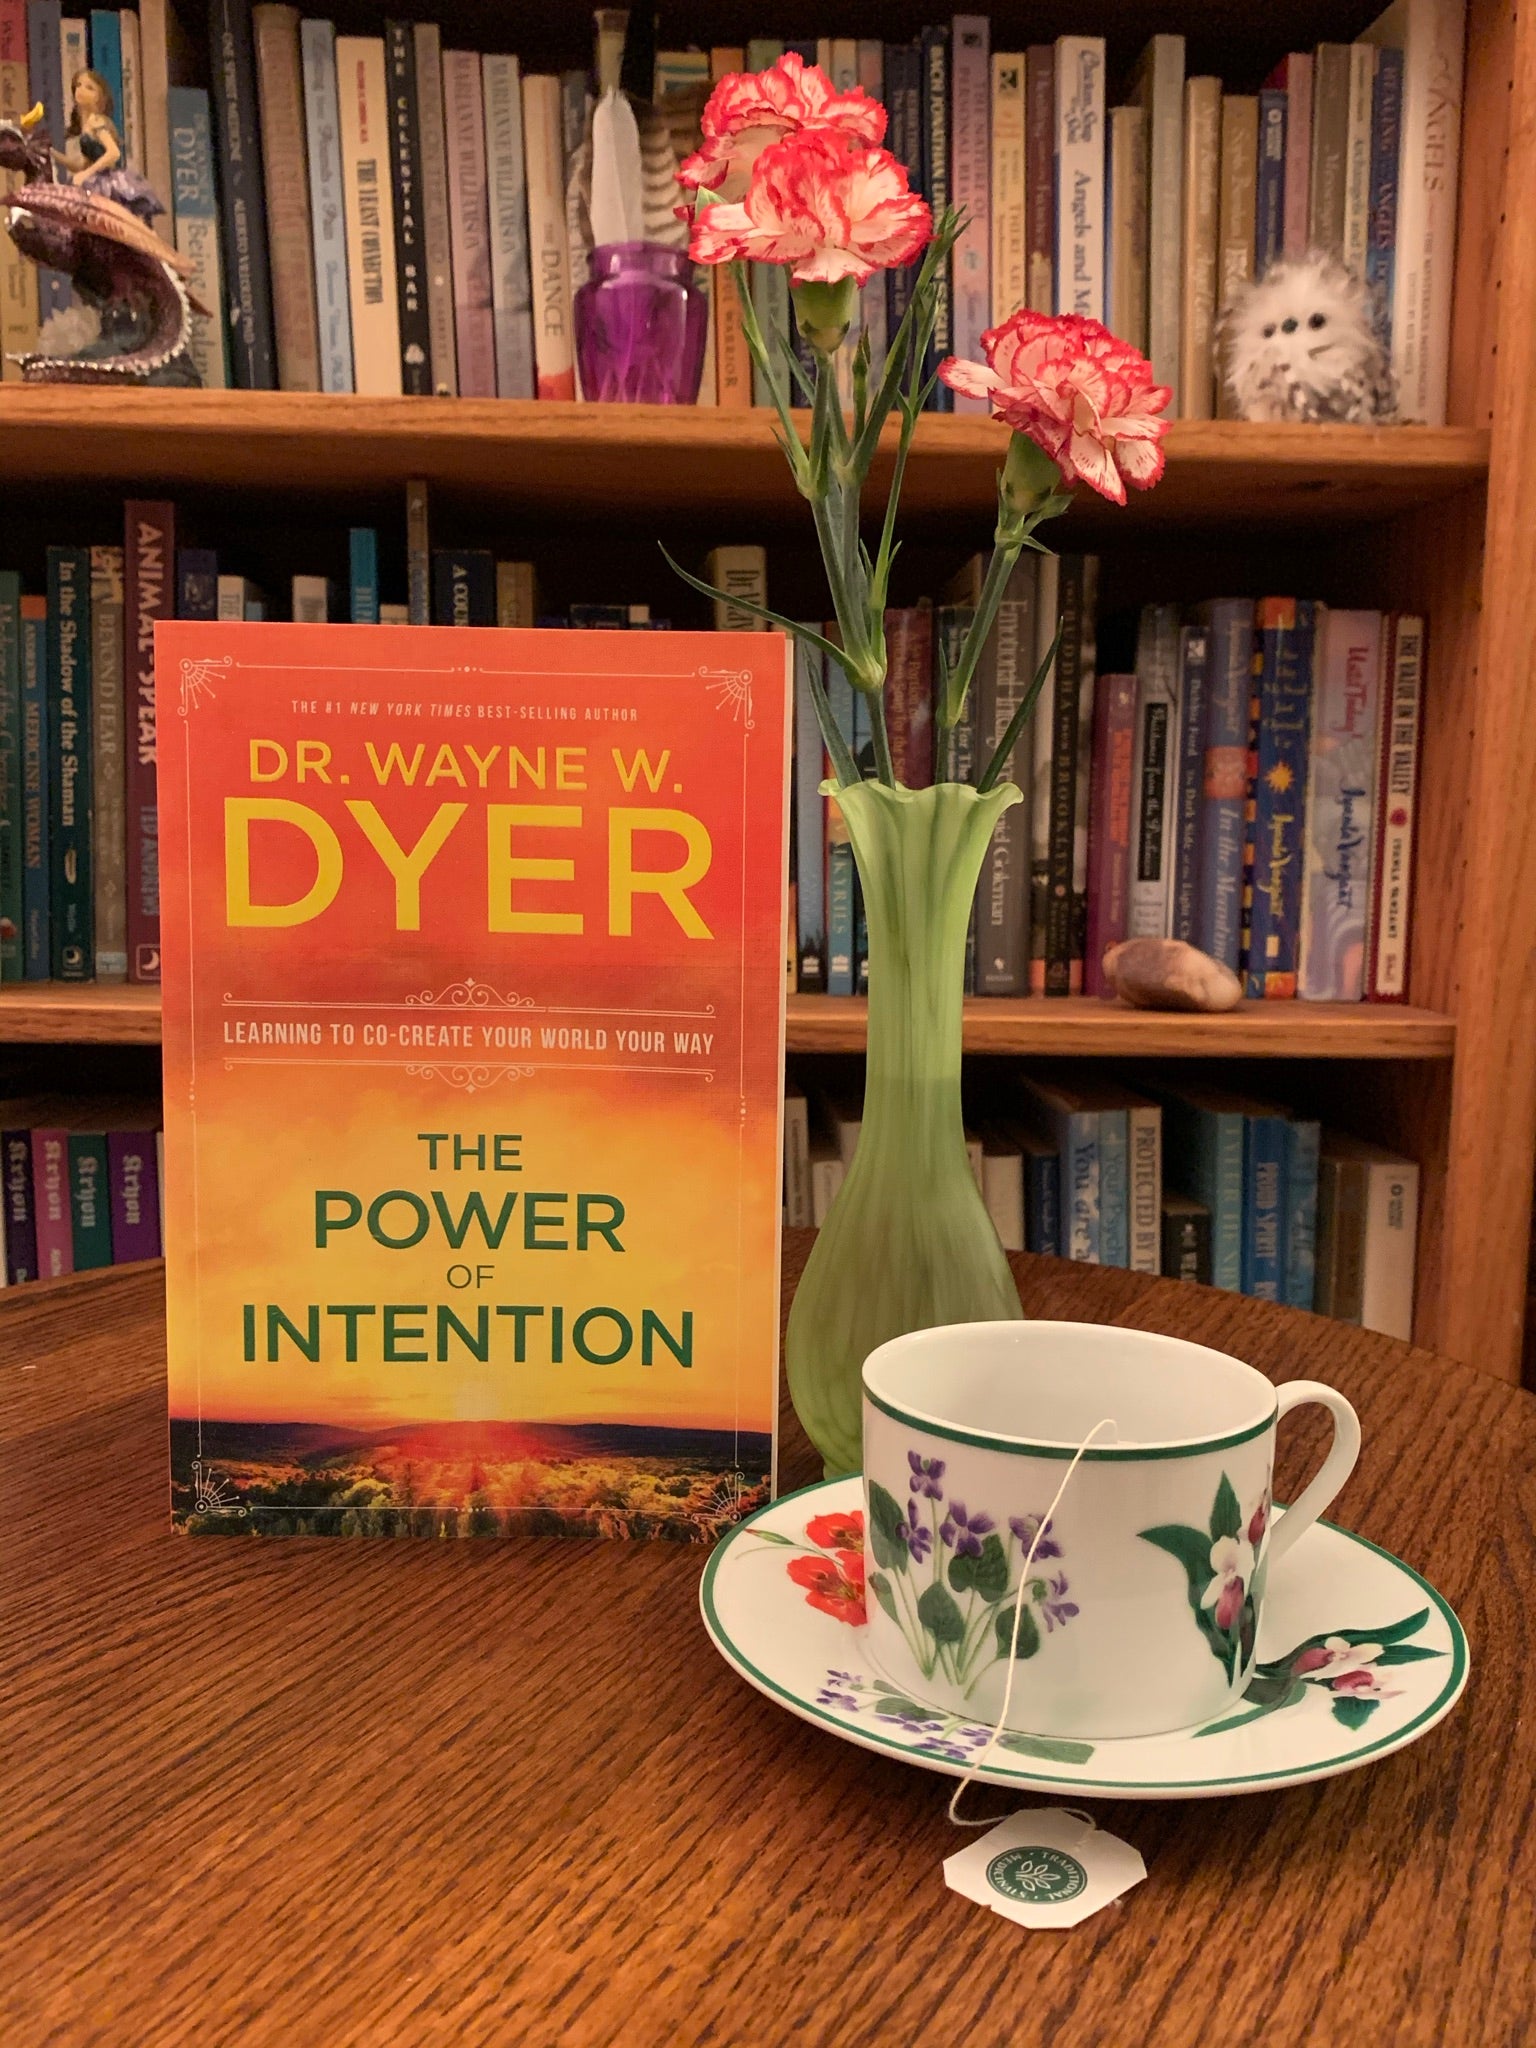 The Power of Intention by Wayne Dyer is a very powerful book about intention and how to use it to manifest the life you desire. "This book explores intention - not as something you do - but as an energy you are a part of. This is the first book to [to have looked at] intention as a field of energy you can access to begin co-creating your life." Dyer is a best selling author and published over 40 books, many of which were best sellers. Cost is $16.99